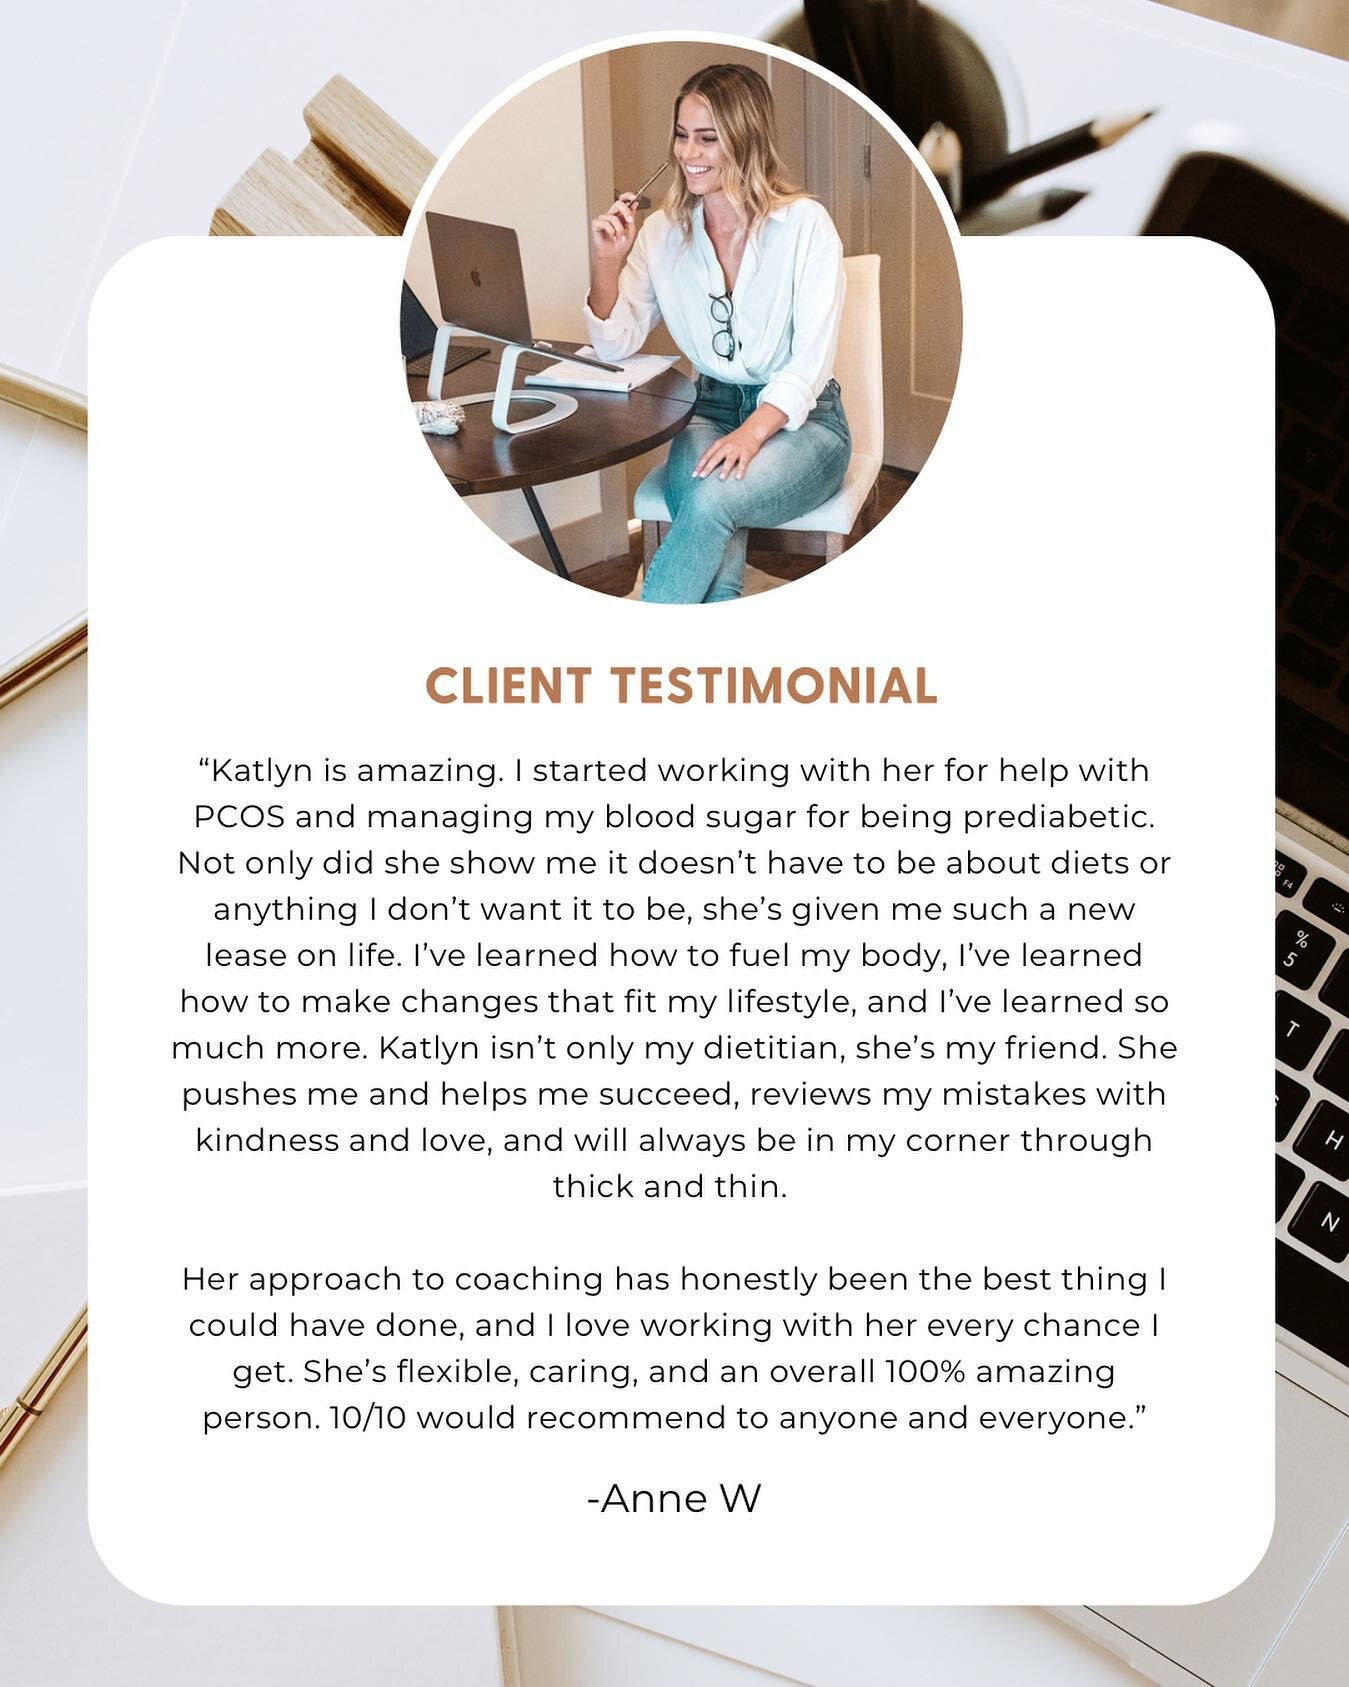 🥹🥹🥹

In prep of the new studio coming soon (🥳🥳), I recently started a Google business page and sent my clients the link to leave reviews of their experience. 

To say this got me in my feels is an understatement. When it comes down to it, I love